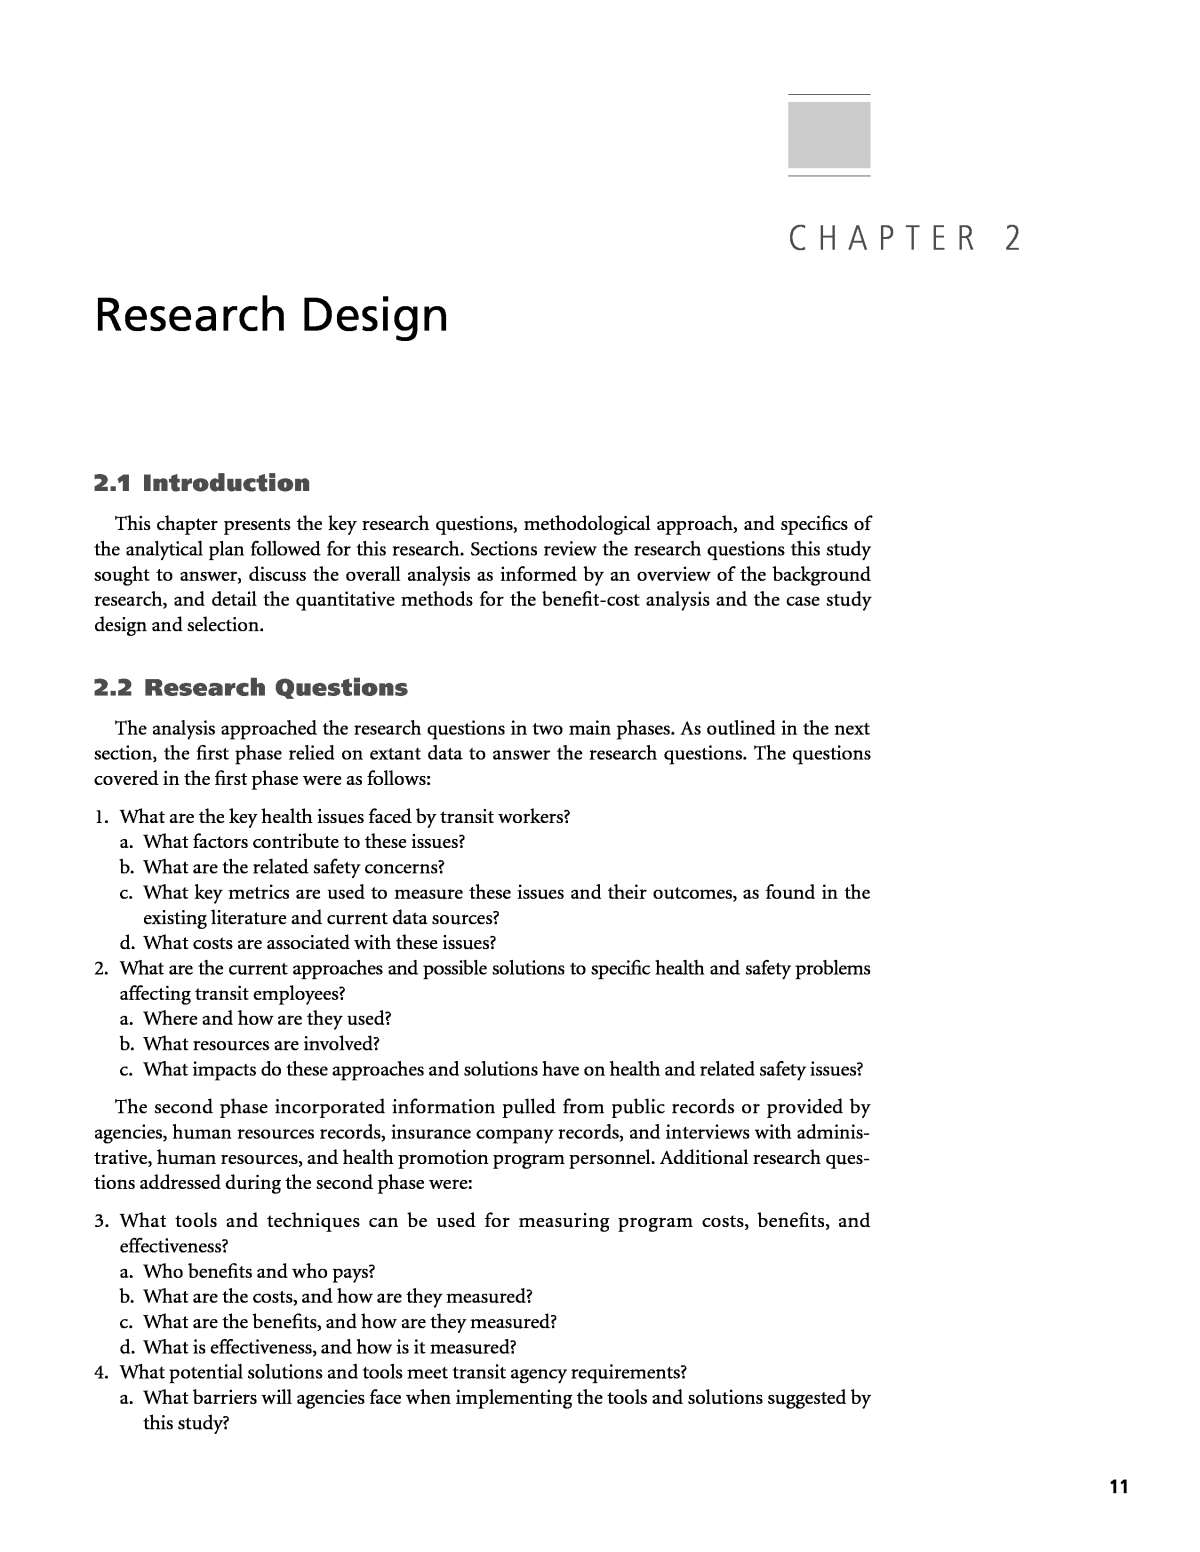 research design chapter 2 example